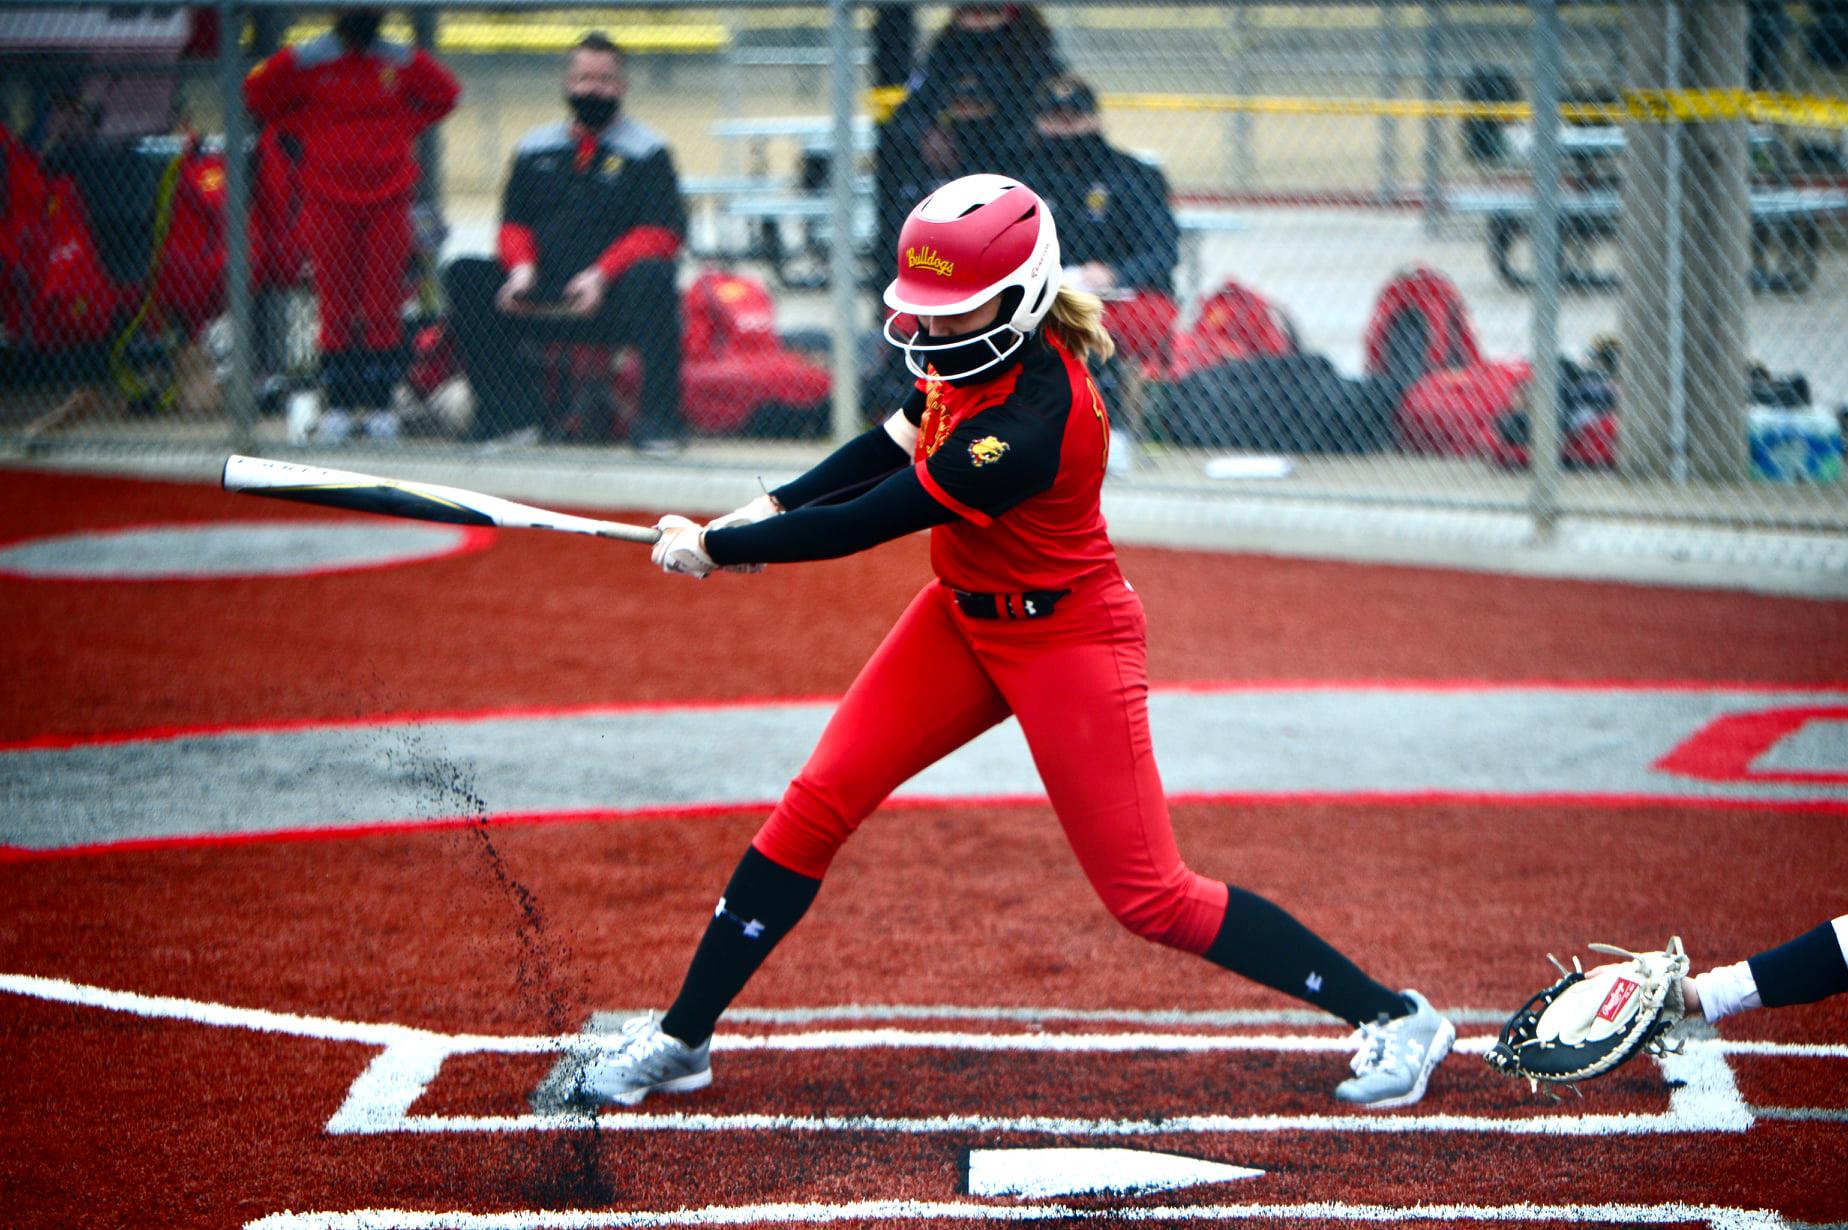 Ferris State Softball Continues Impressive Start With Two Wins In Kentucky